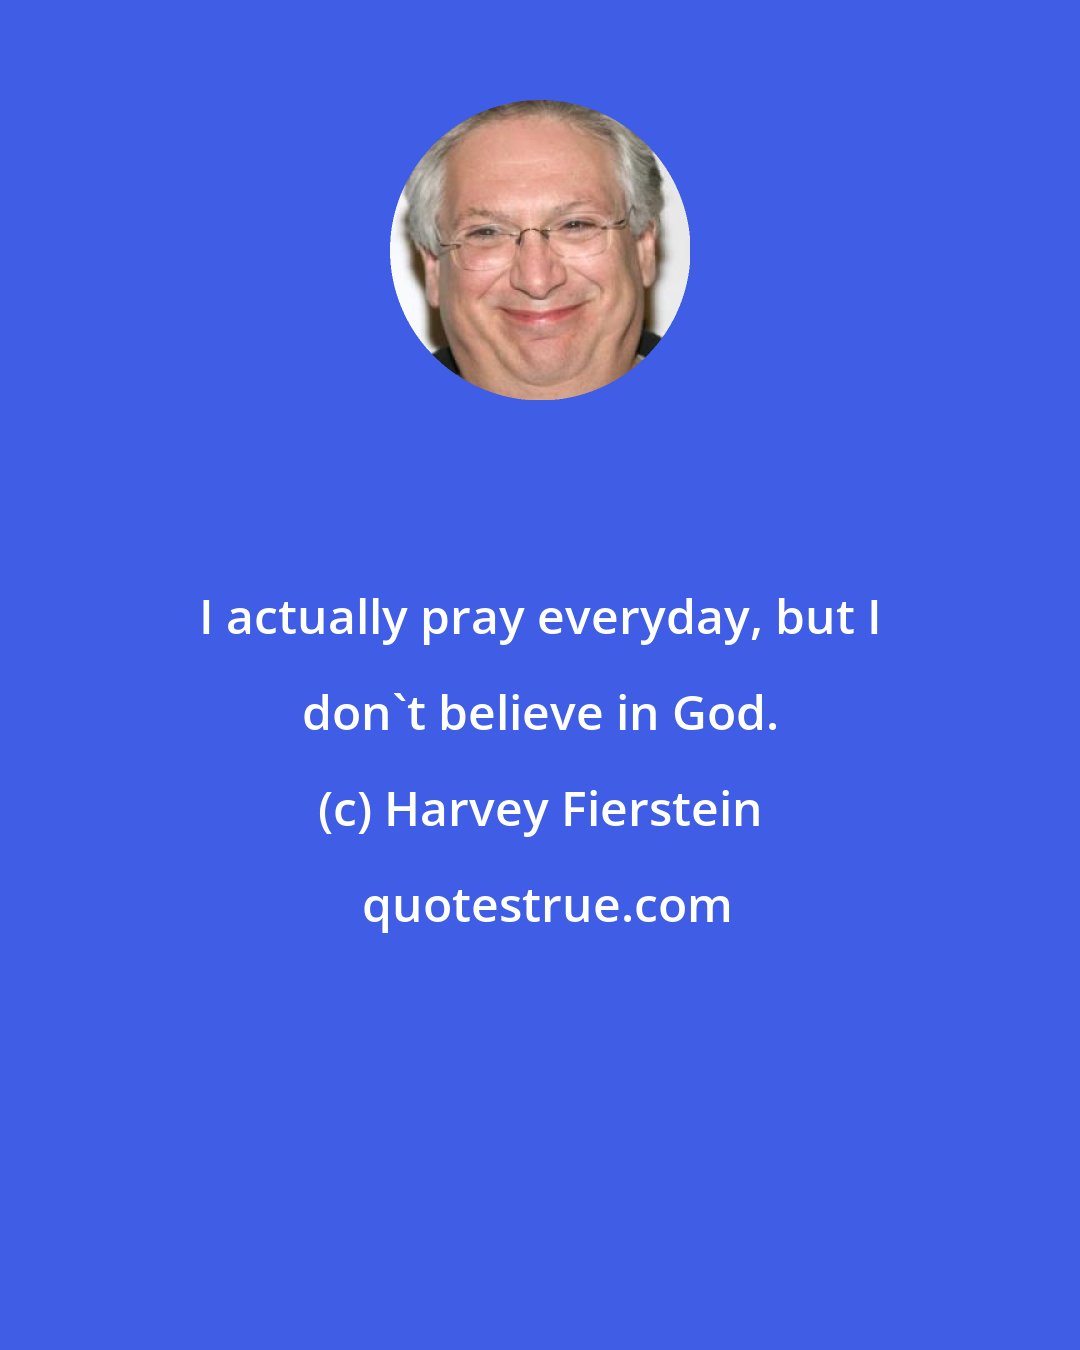 Harvey Fierstein: I actually pray everyday, but I don't believe in God.